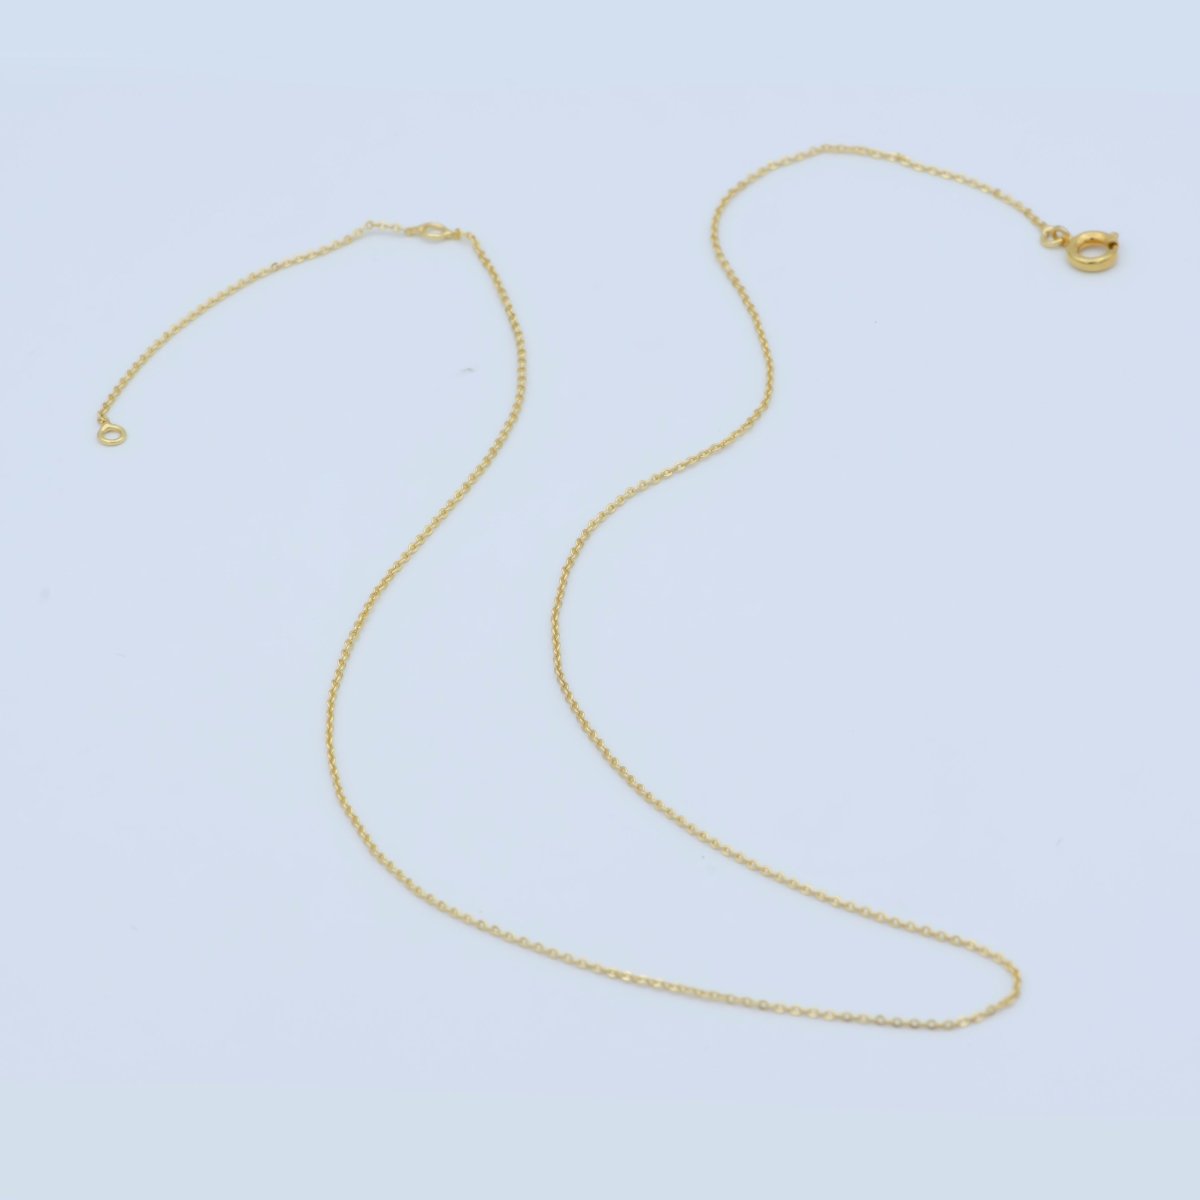 24K Gold Filled 0.7mm Dainty Cable Chain 18 Inch Necklace w. Extender | WA-187 Clearance Pricing - DLUXCA